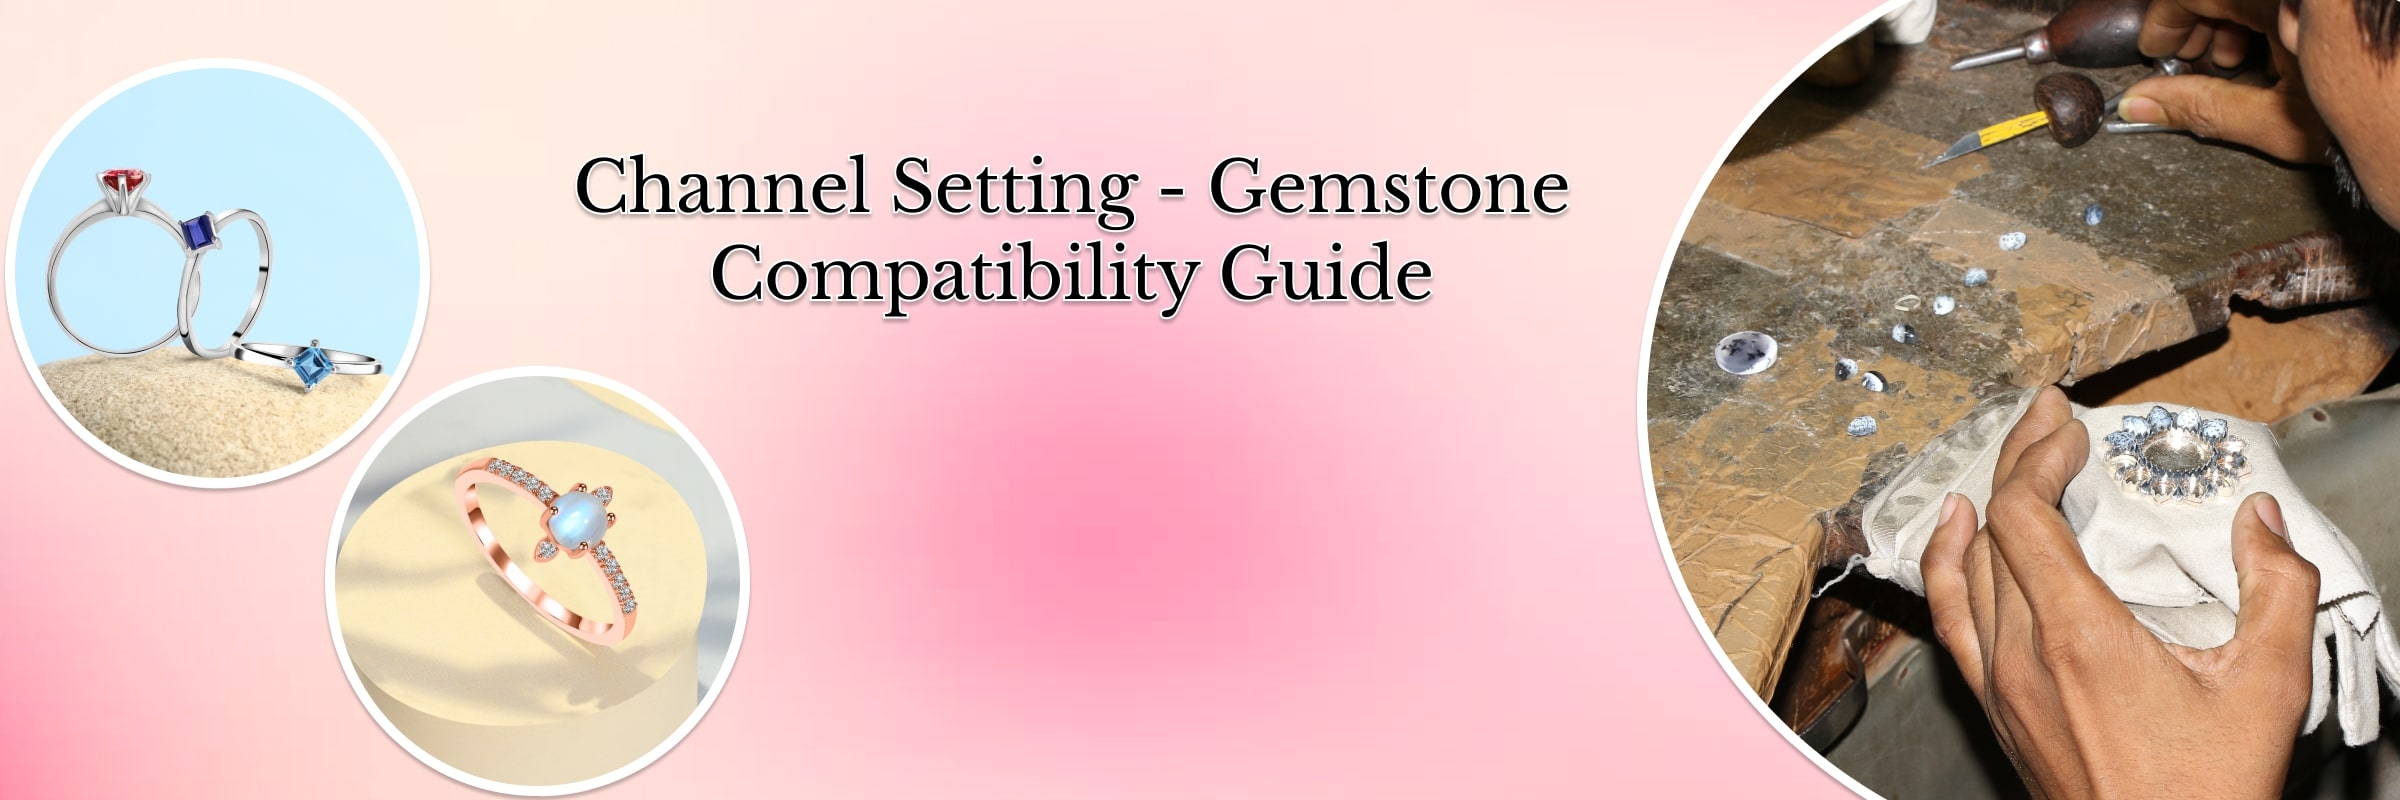 Types of Gemstones Suitable for Channel Setting